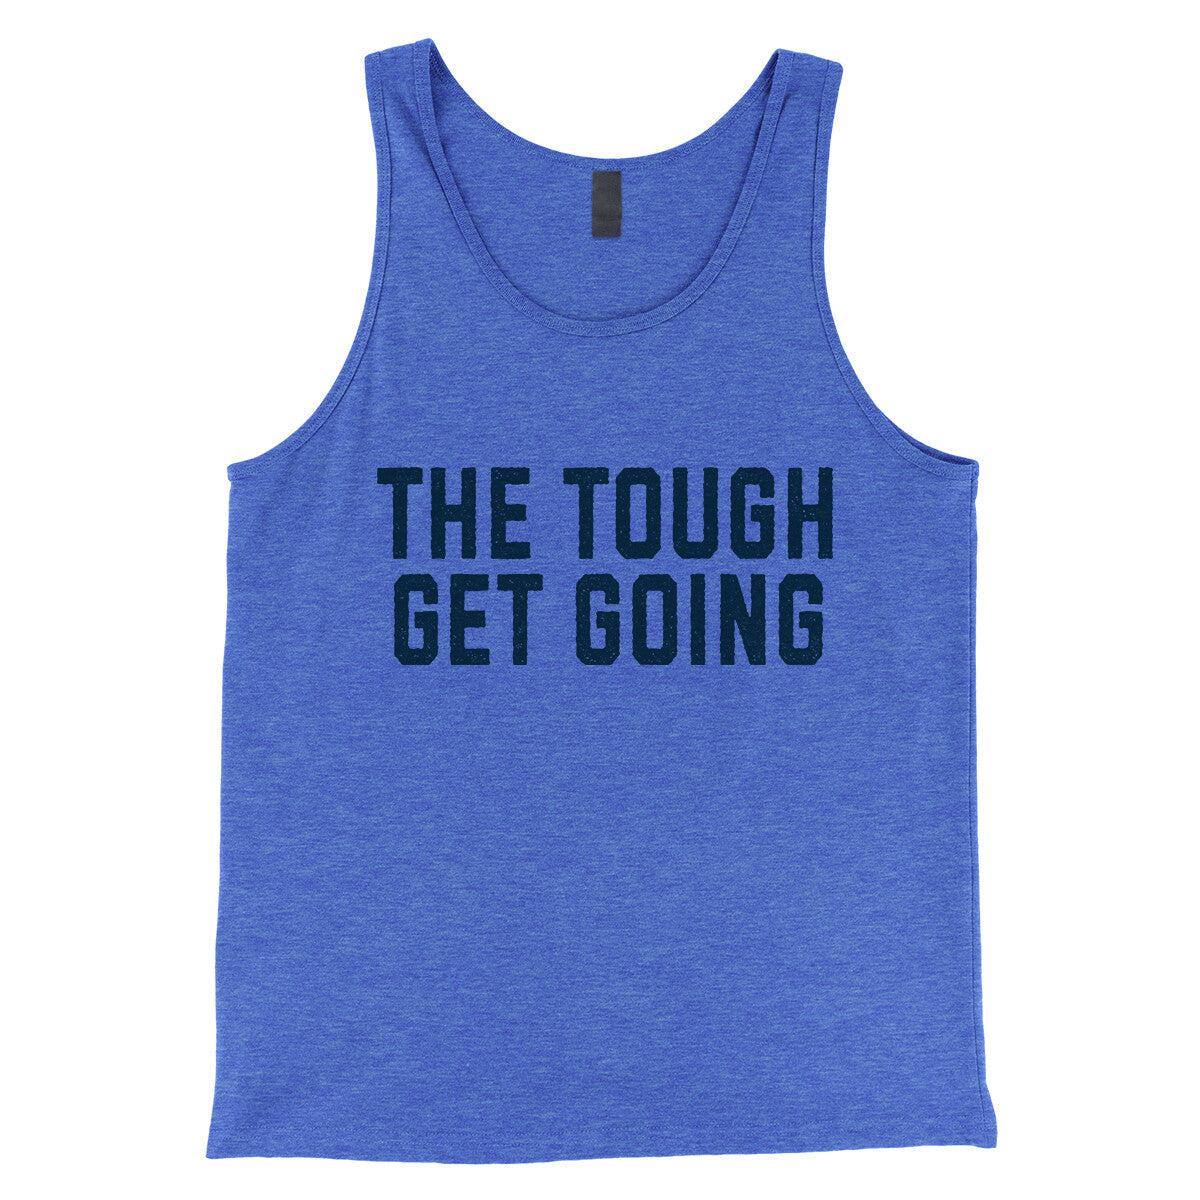 The Tough Get Going in True Royal TriBlend Color